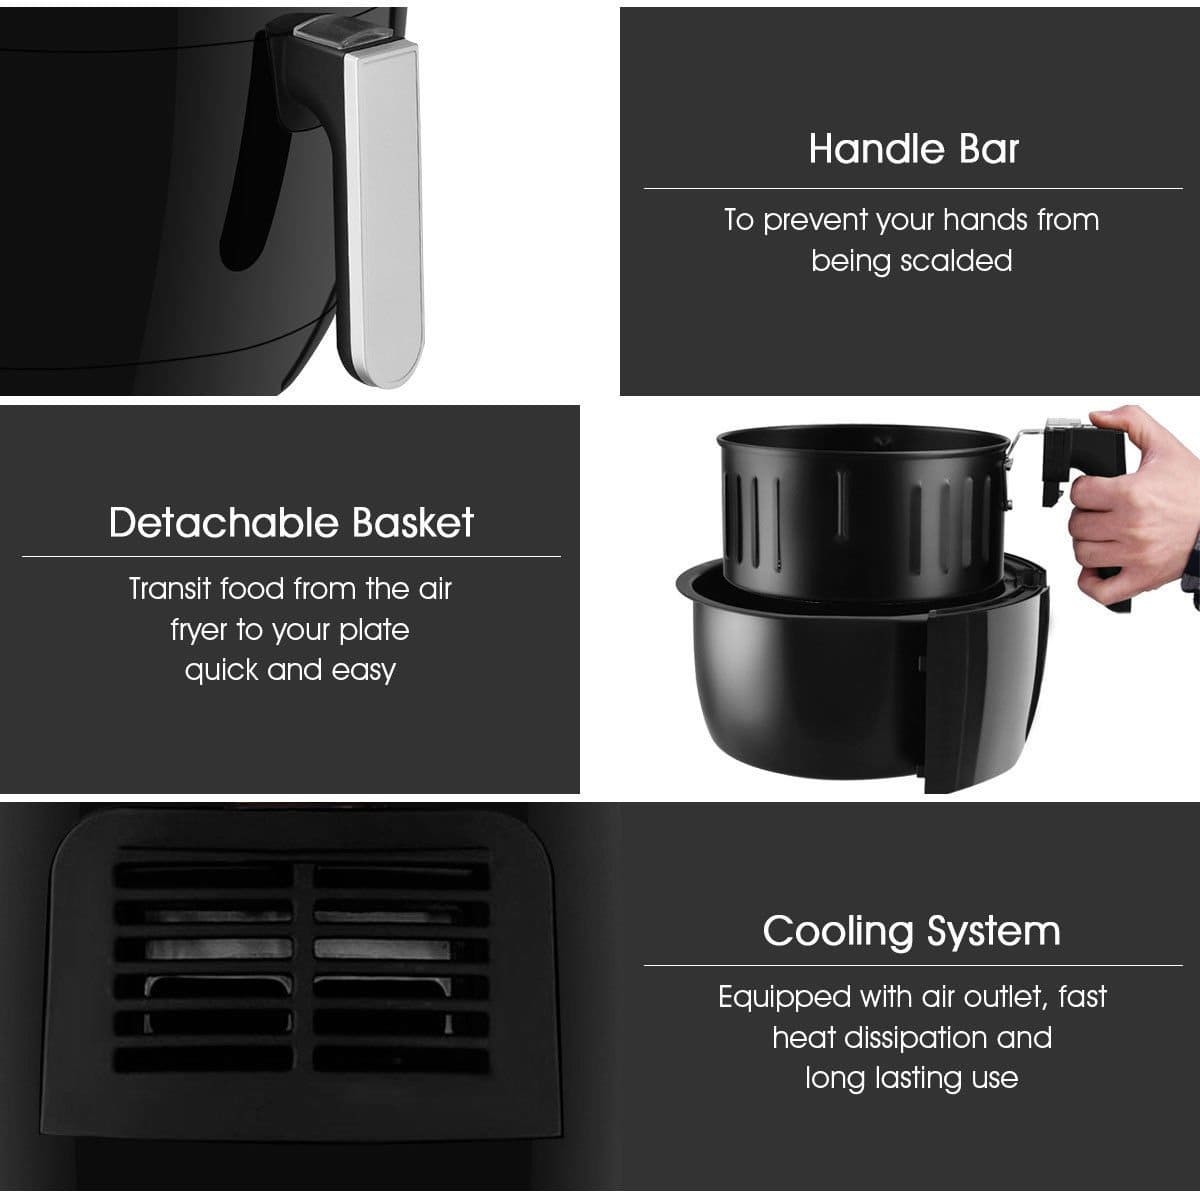 Gymax 7-in-1 Air Fryer 1400W 3.4Qt Oil Free Temperature&Time Control LCD Touch Screen - Black